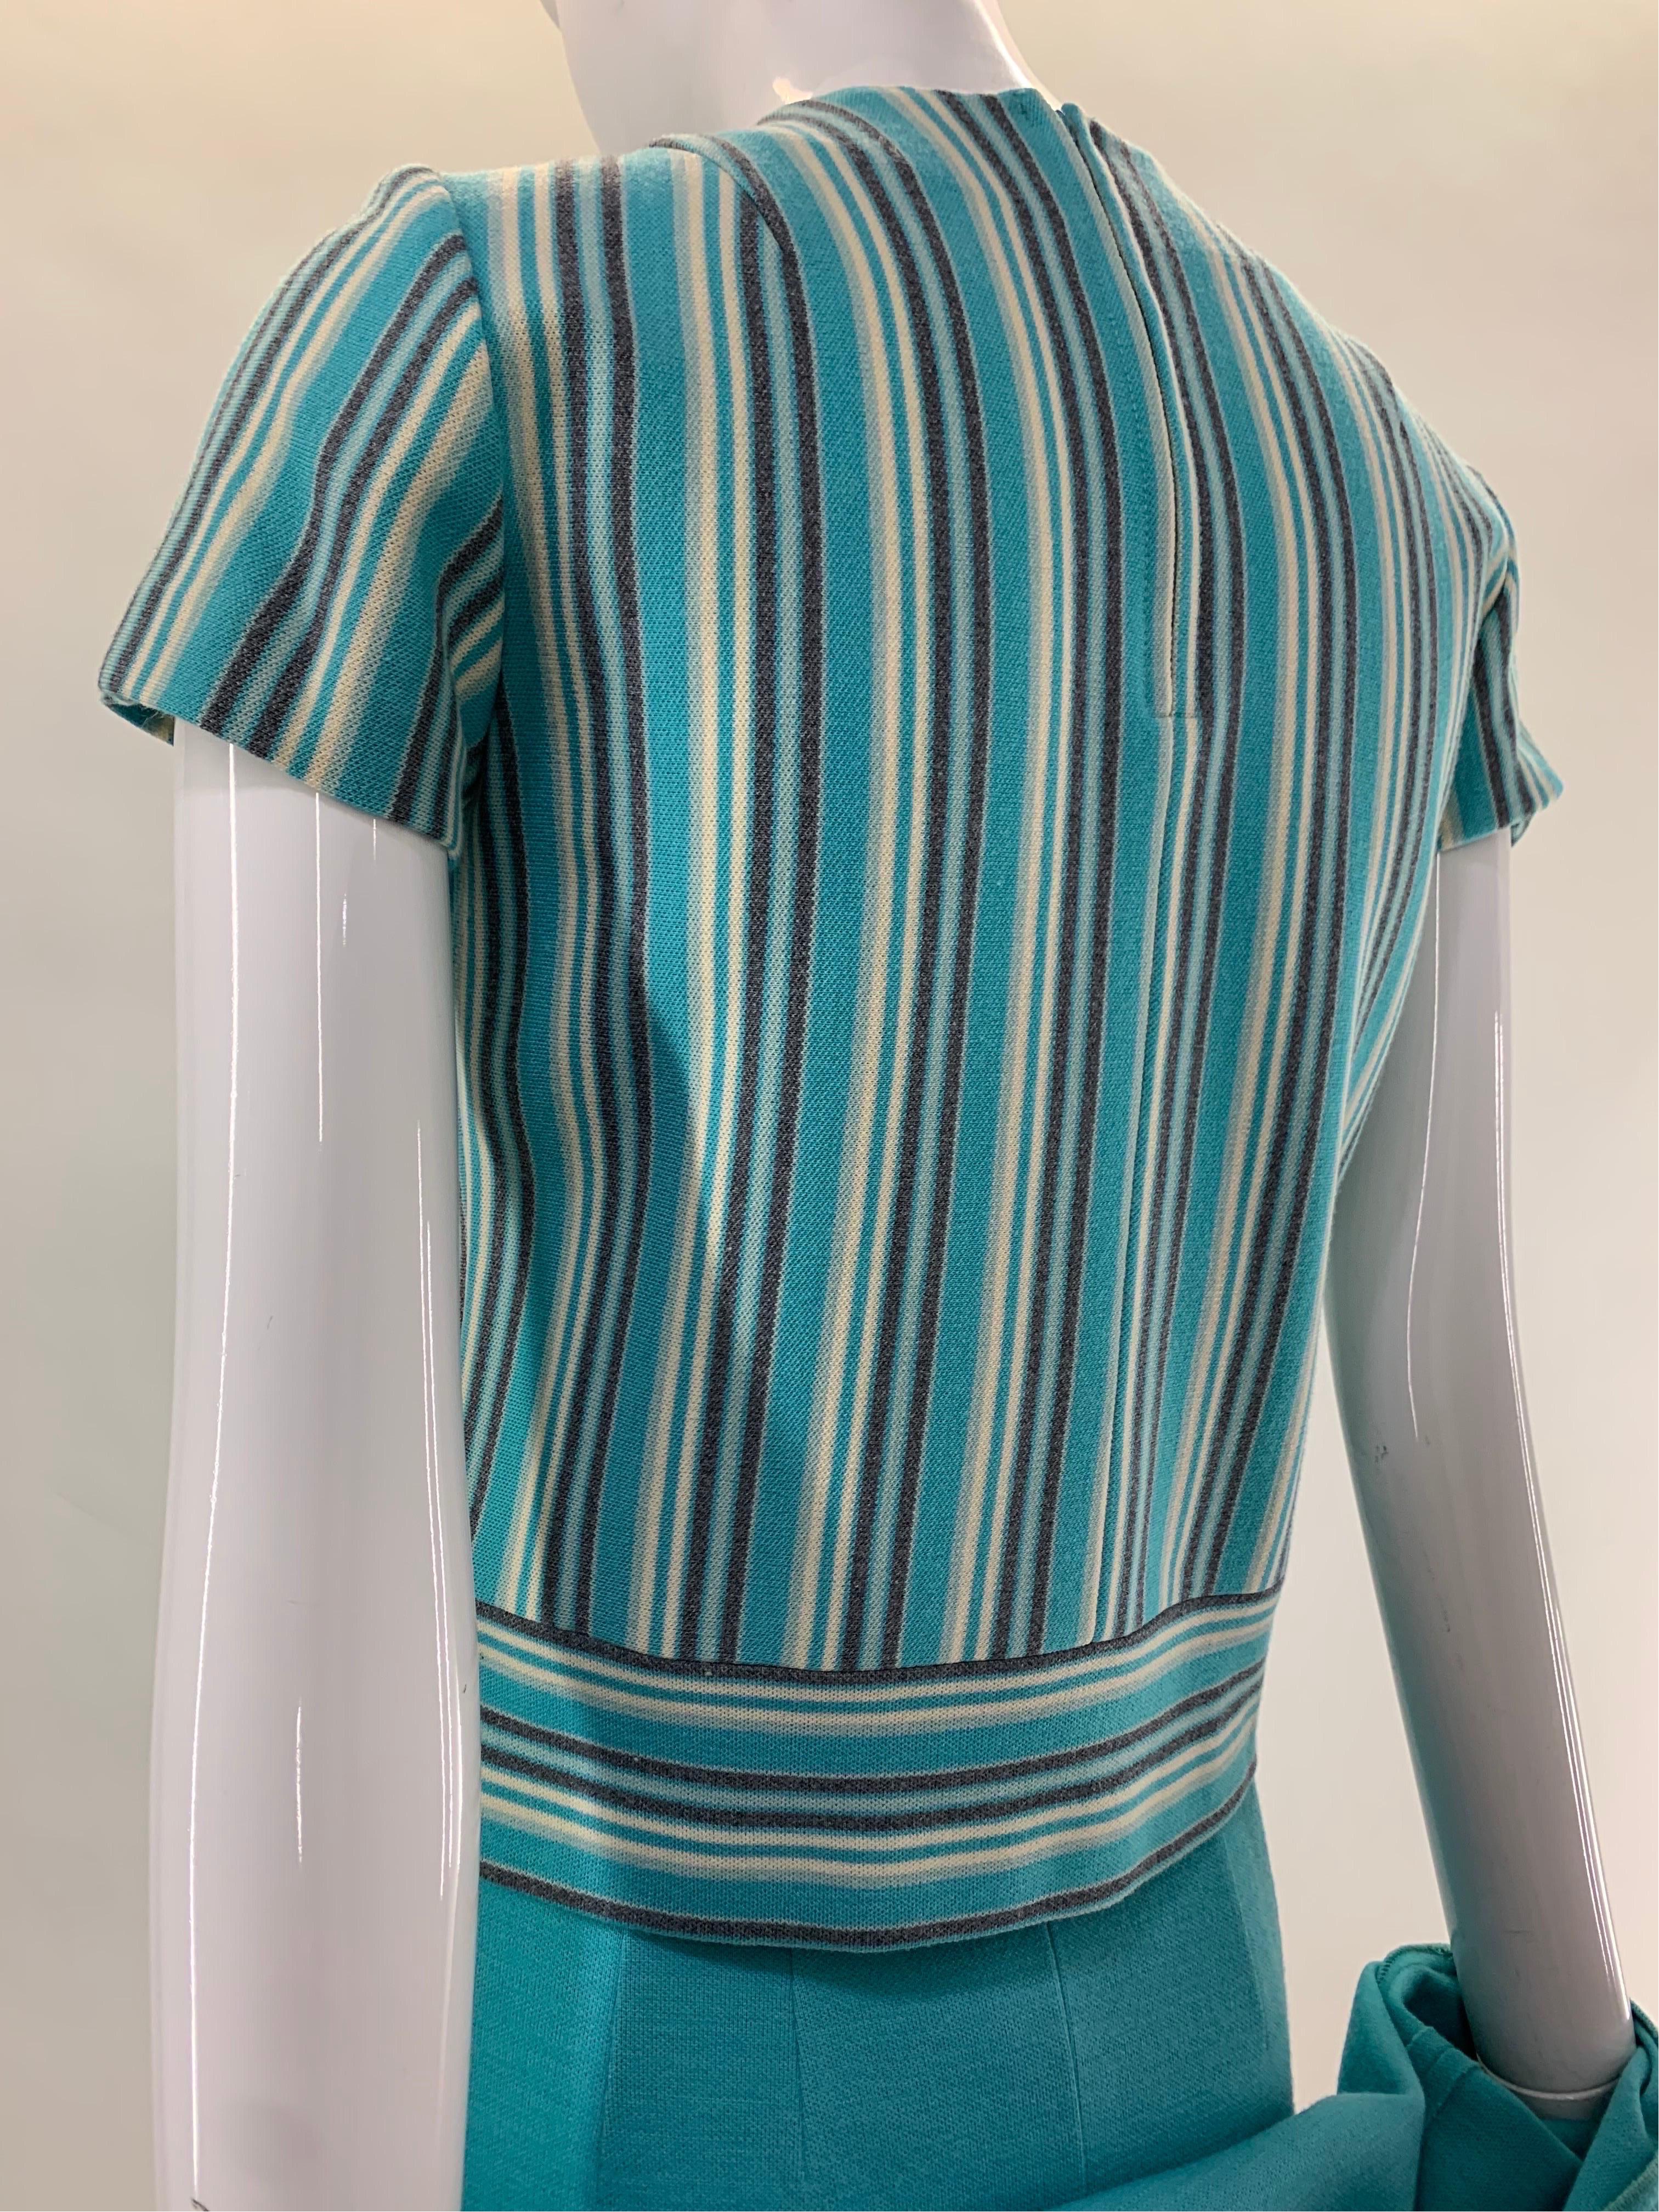 1960 Promenade - Holland Turquoise Wool Double-Knit 3-Piece Skirt Suit  For Sale 2